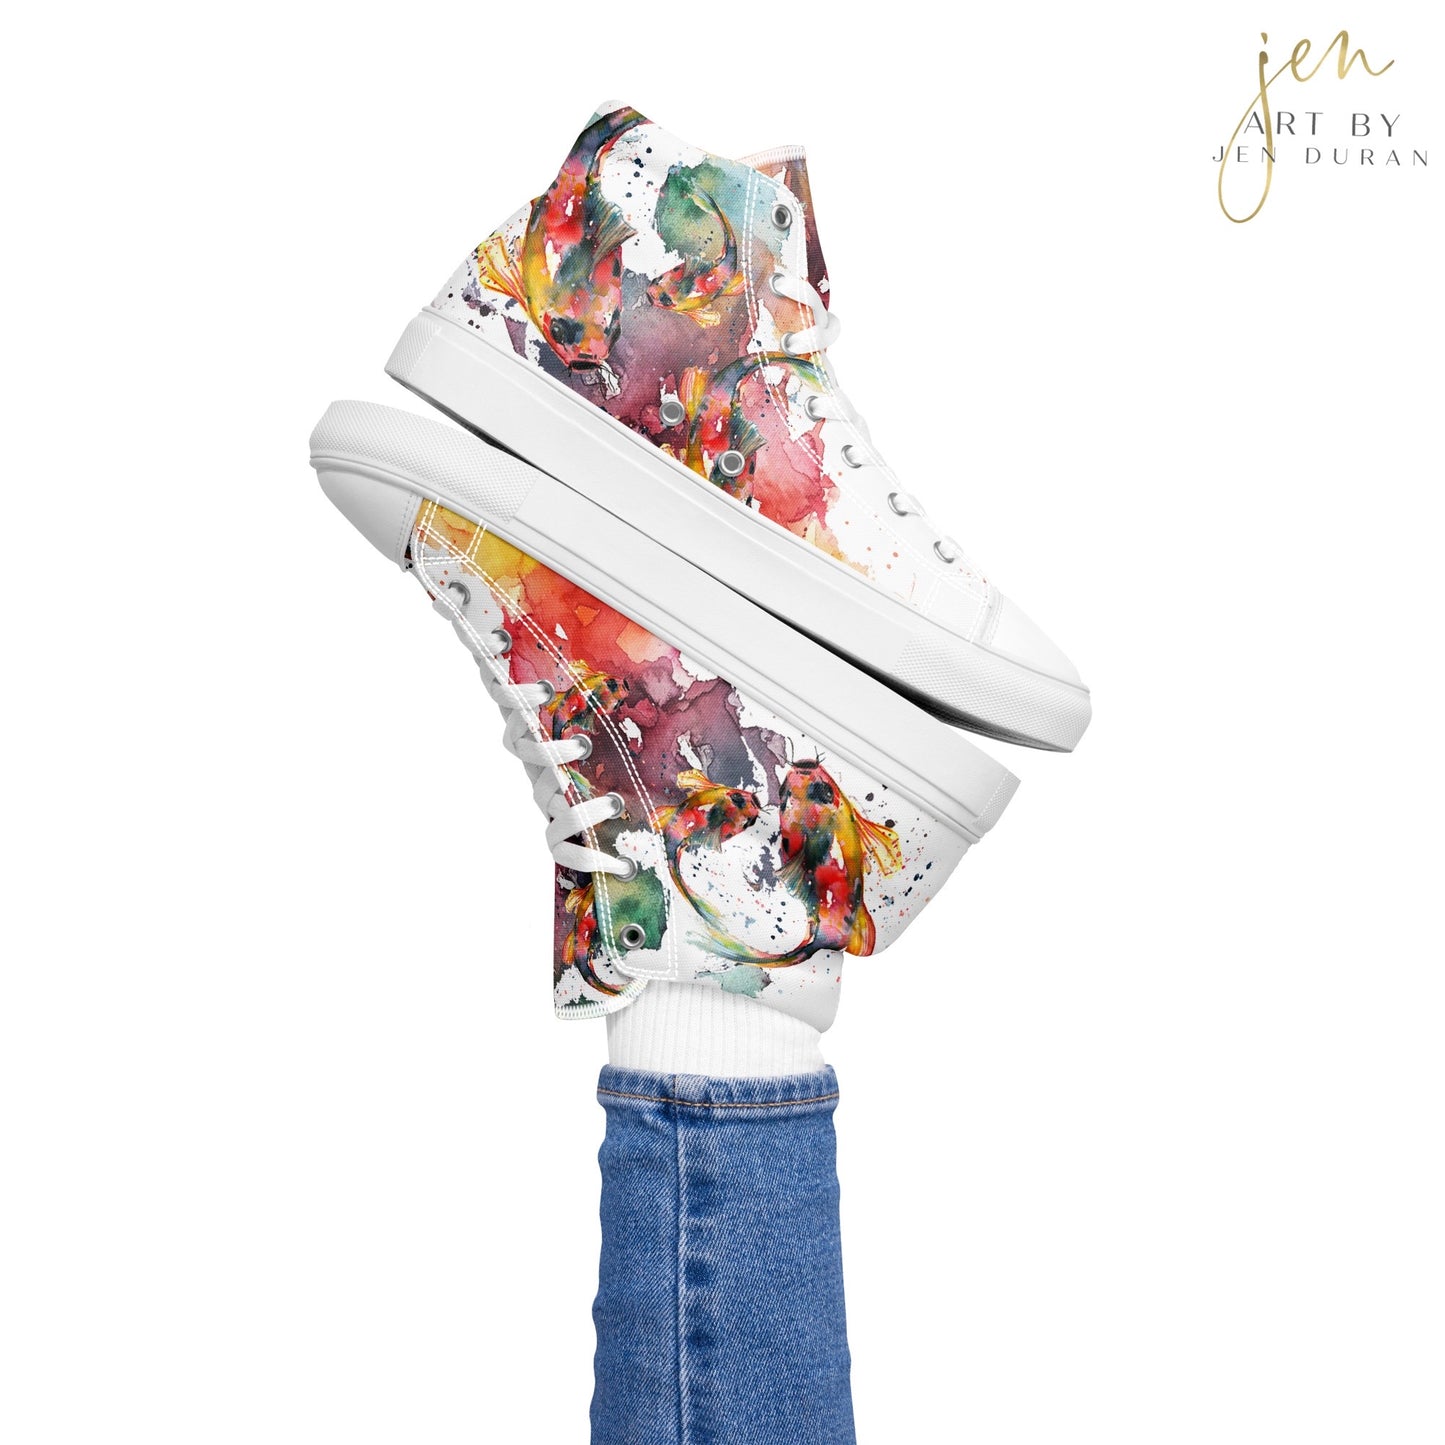 Women’s High Top Canvas Shoes | High Top Sneakers | Watercolor Koi Fish Design